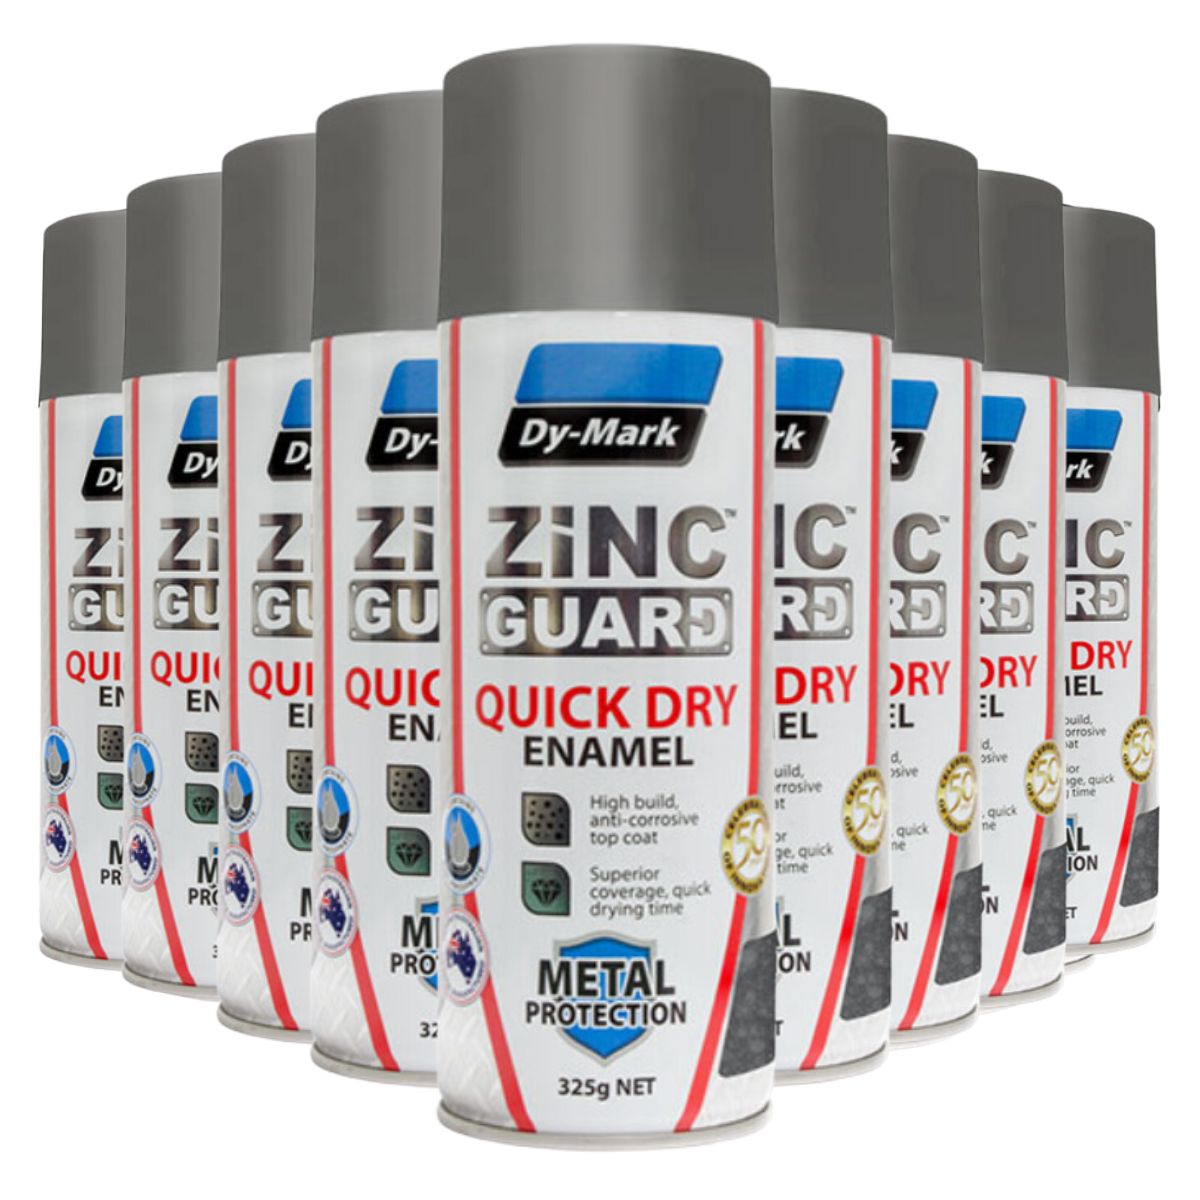 Dym-Mark Zinc Guard QD Hammered Charcoal Enamel 325g (12 Cans) - South East Clearance Centre